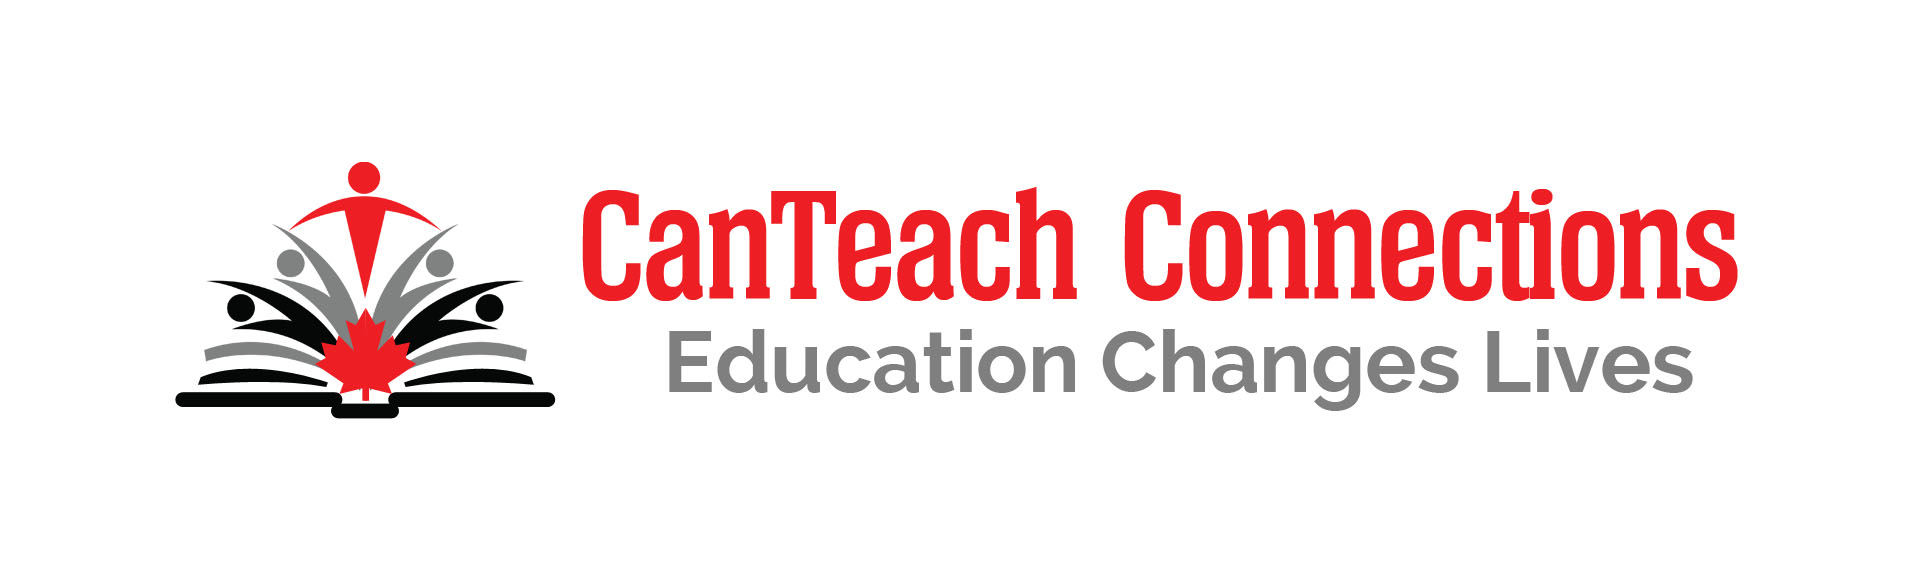 Showcase Image for CanTeach Connections